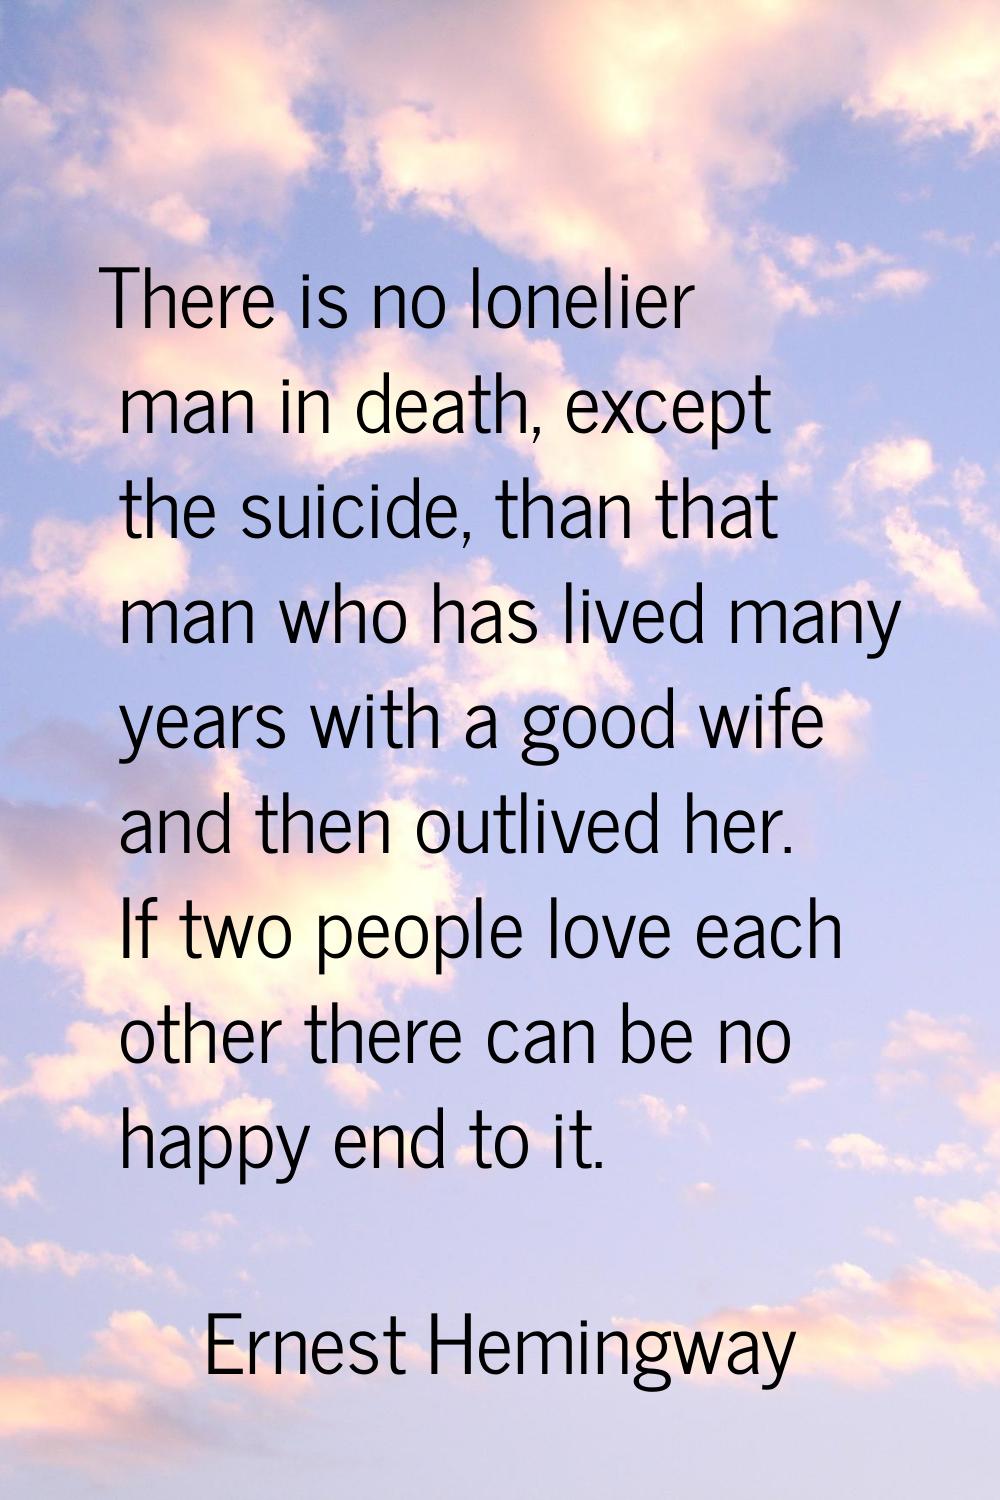 There is no lonelier man in death, except the suicide, than that man who has lived many years with 